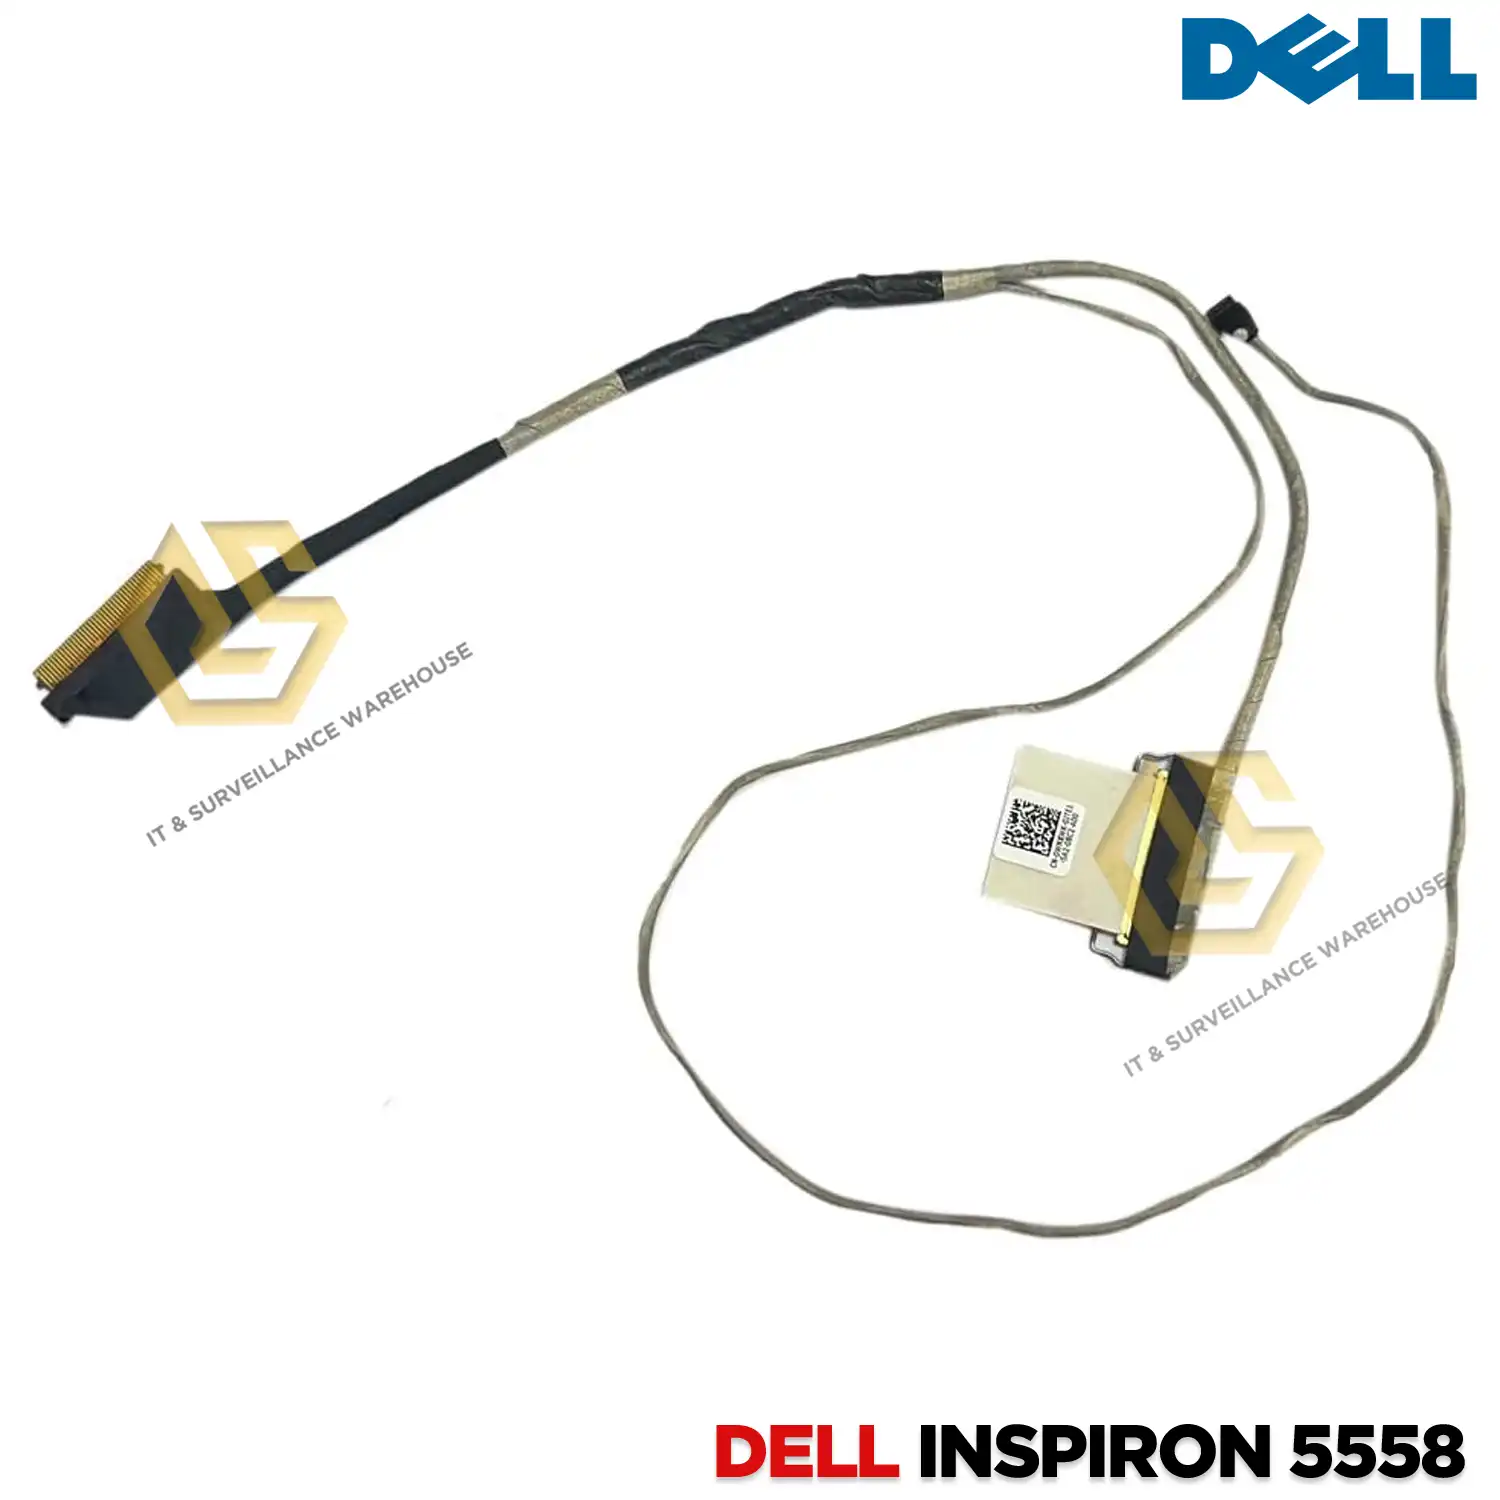 DISPLAY CABLE DELL INSPIRON 5558